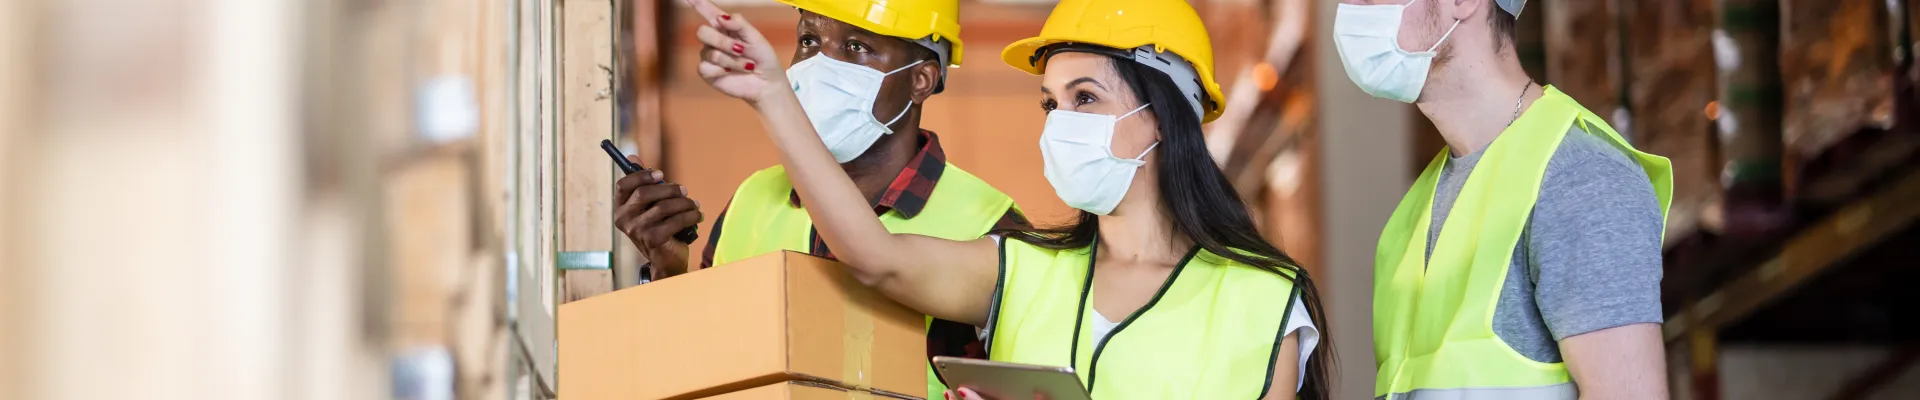 Safety Measures for Warehouse Environments